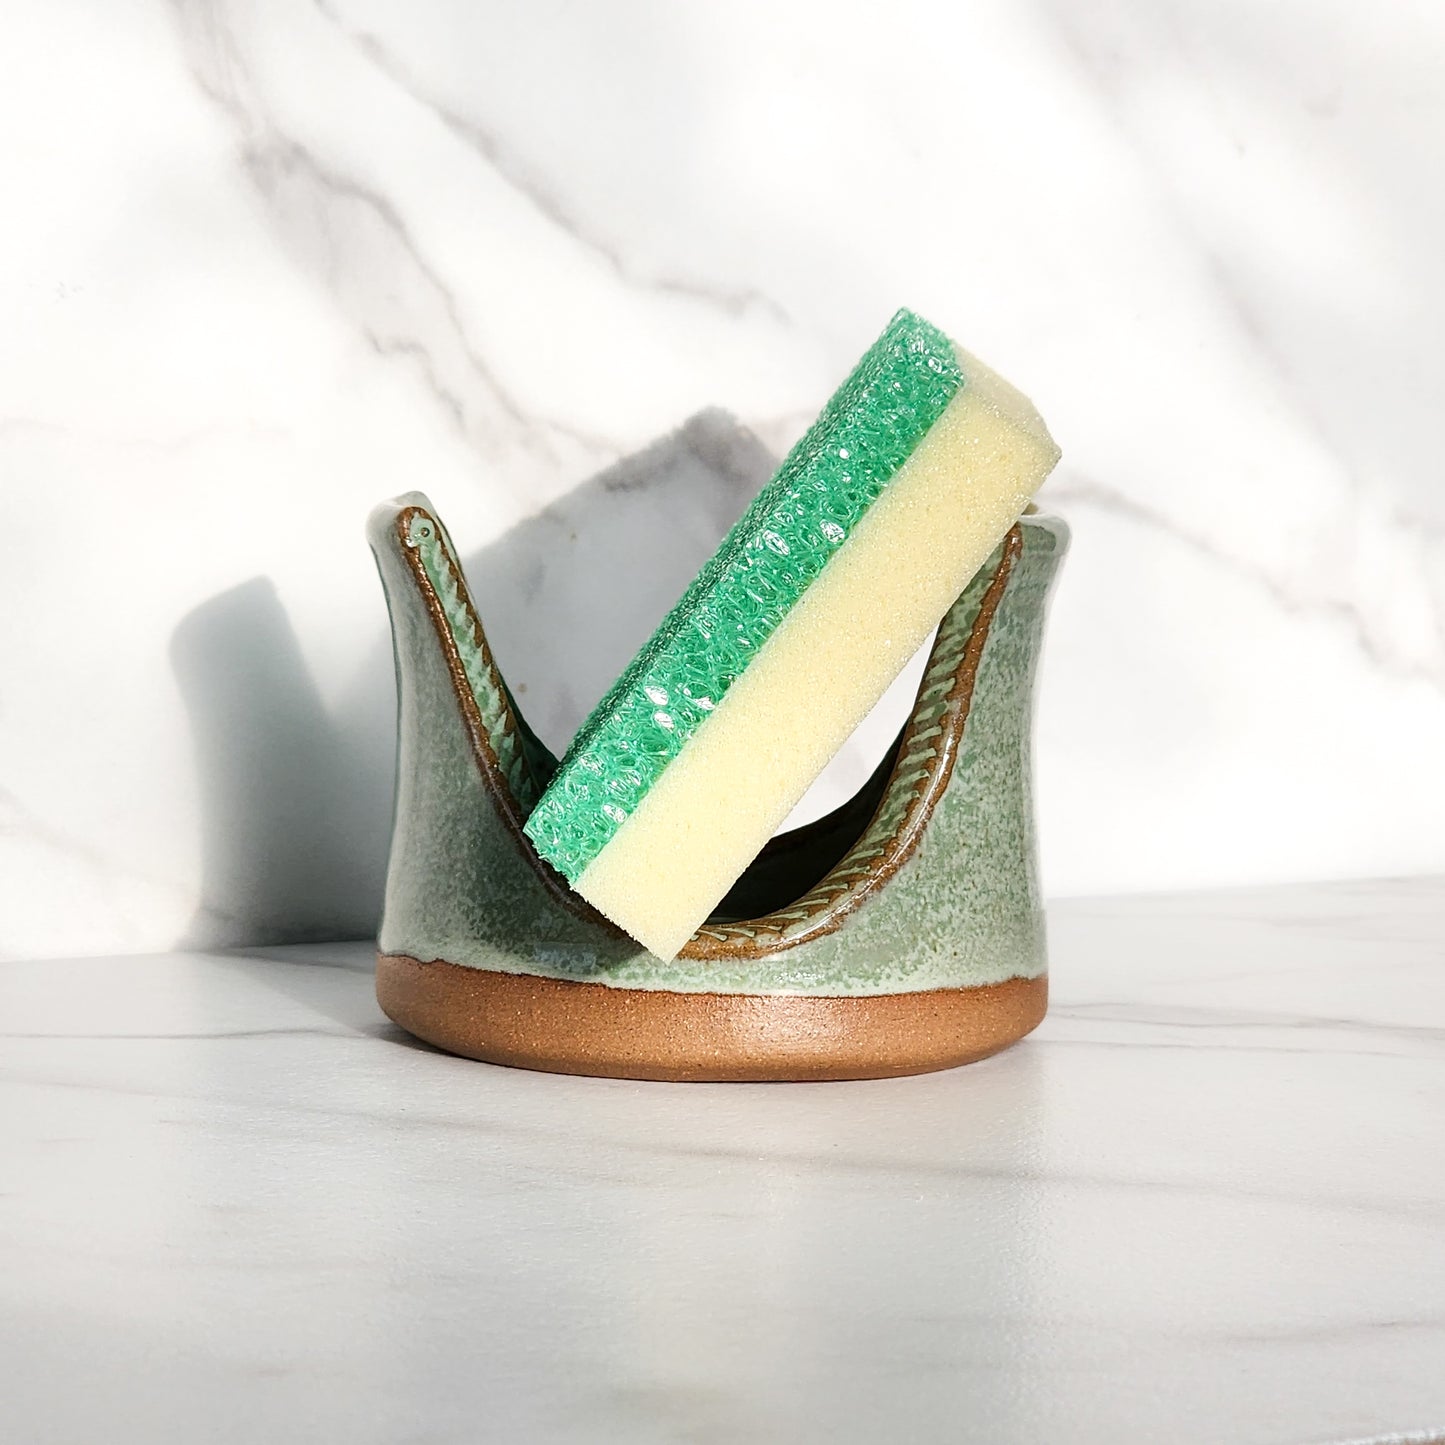  Image: Clinton Pottery's Handmade Sponge Holder in Light Green – A vibrant and practical kitchen accessory, carefully crafted by artisans. This durable stoneware holder, in refreshing Light Green, adds a touch of nature's vitality to your kitchen, reminiscent of spring foliage and growth. Designed to securely hold your sponge and prevent water spread, it keeps your counters and sink area tidy. 